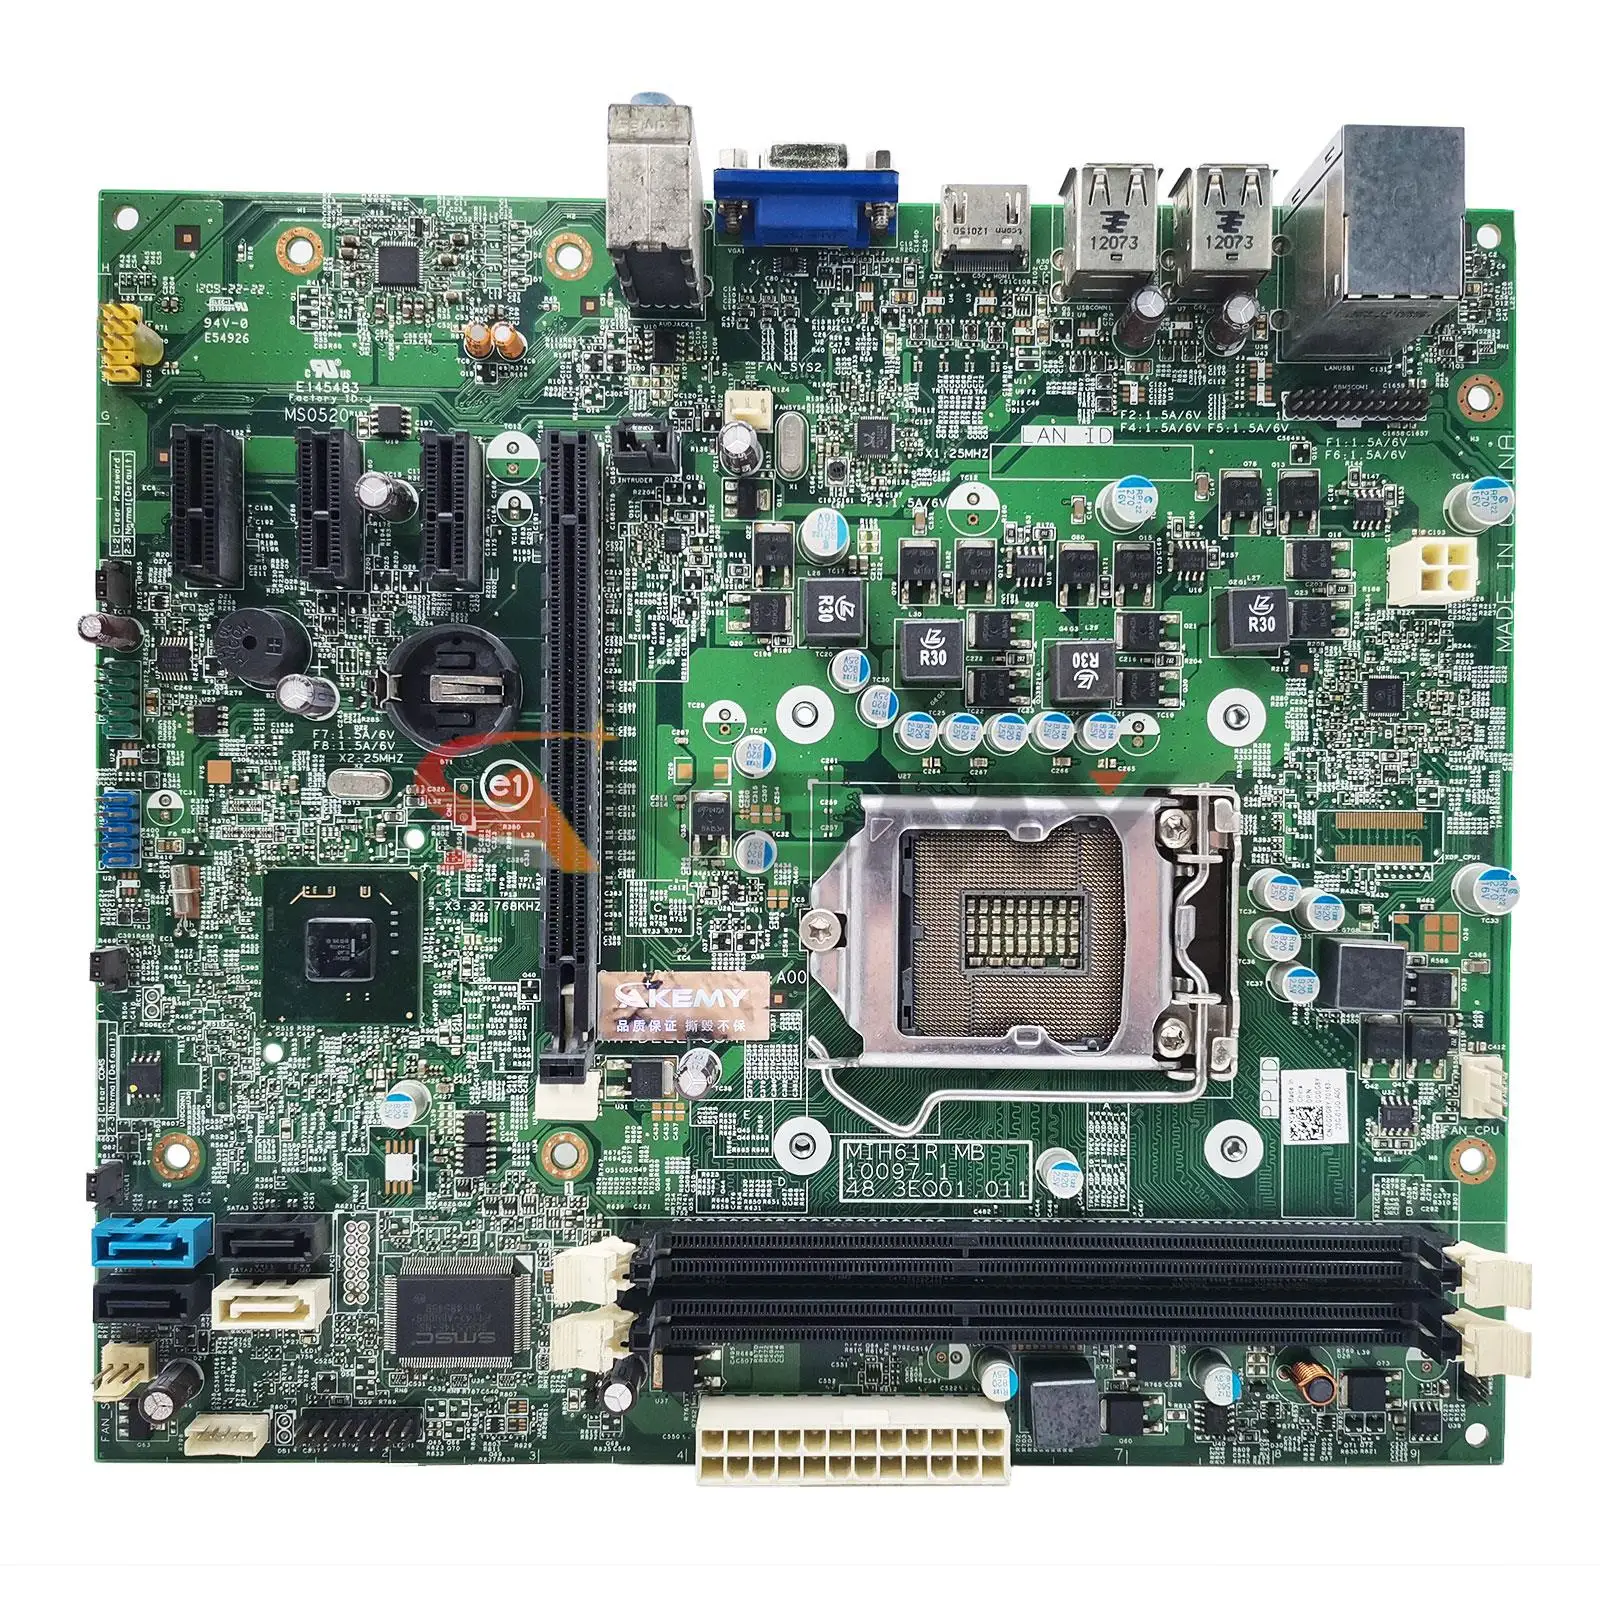 

M5DCD For DELL OptiPlex 390 620 MT Motherboard MIH61R 10097-1 48.3EQ01.011 Mainboard 100%Tested Fully Work